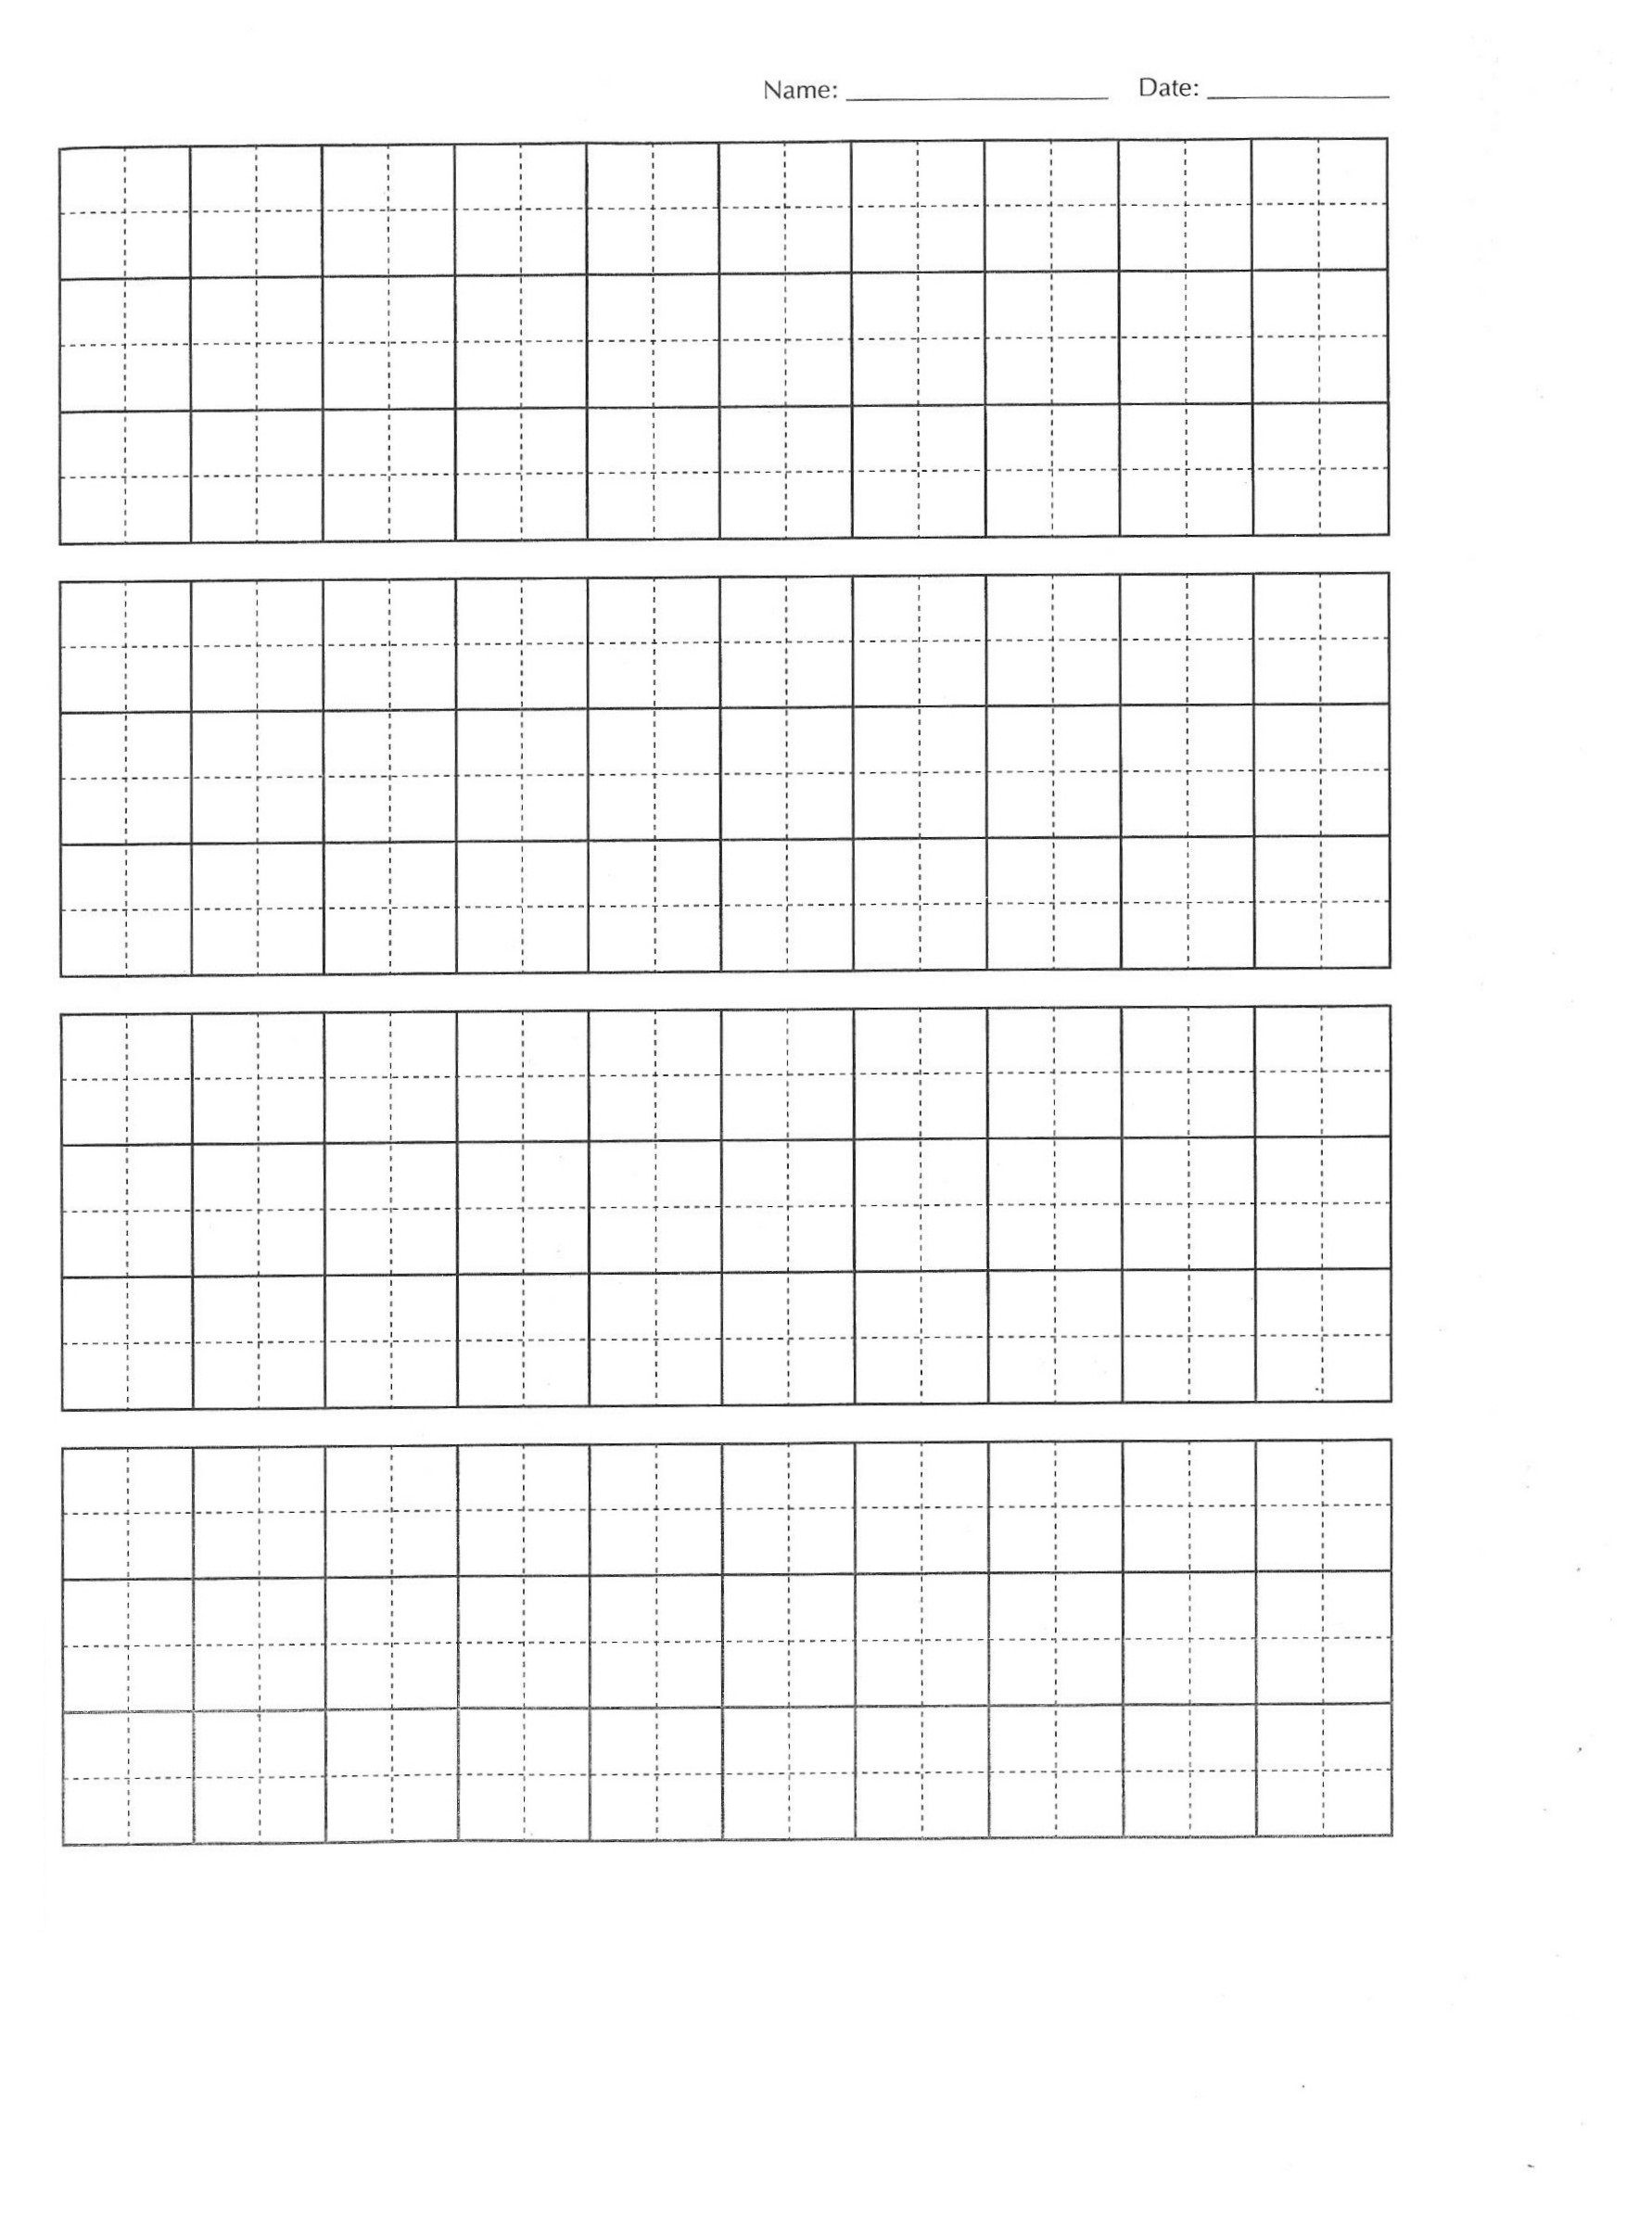 Chinese Character Practice Sheet Google Search Radionique 